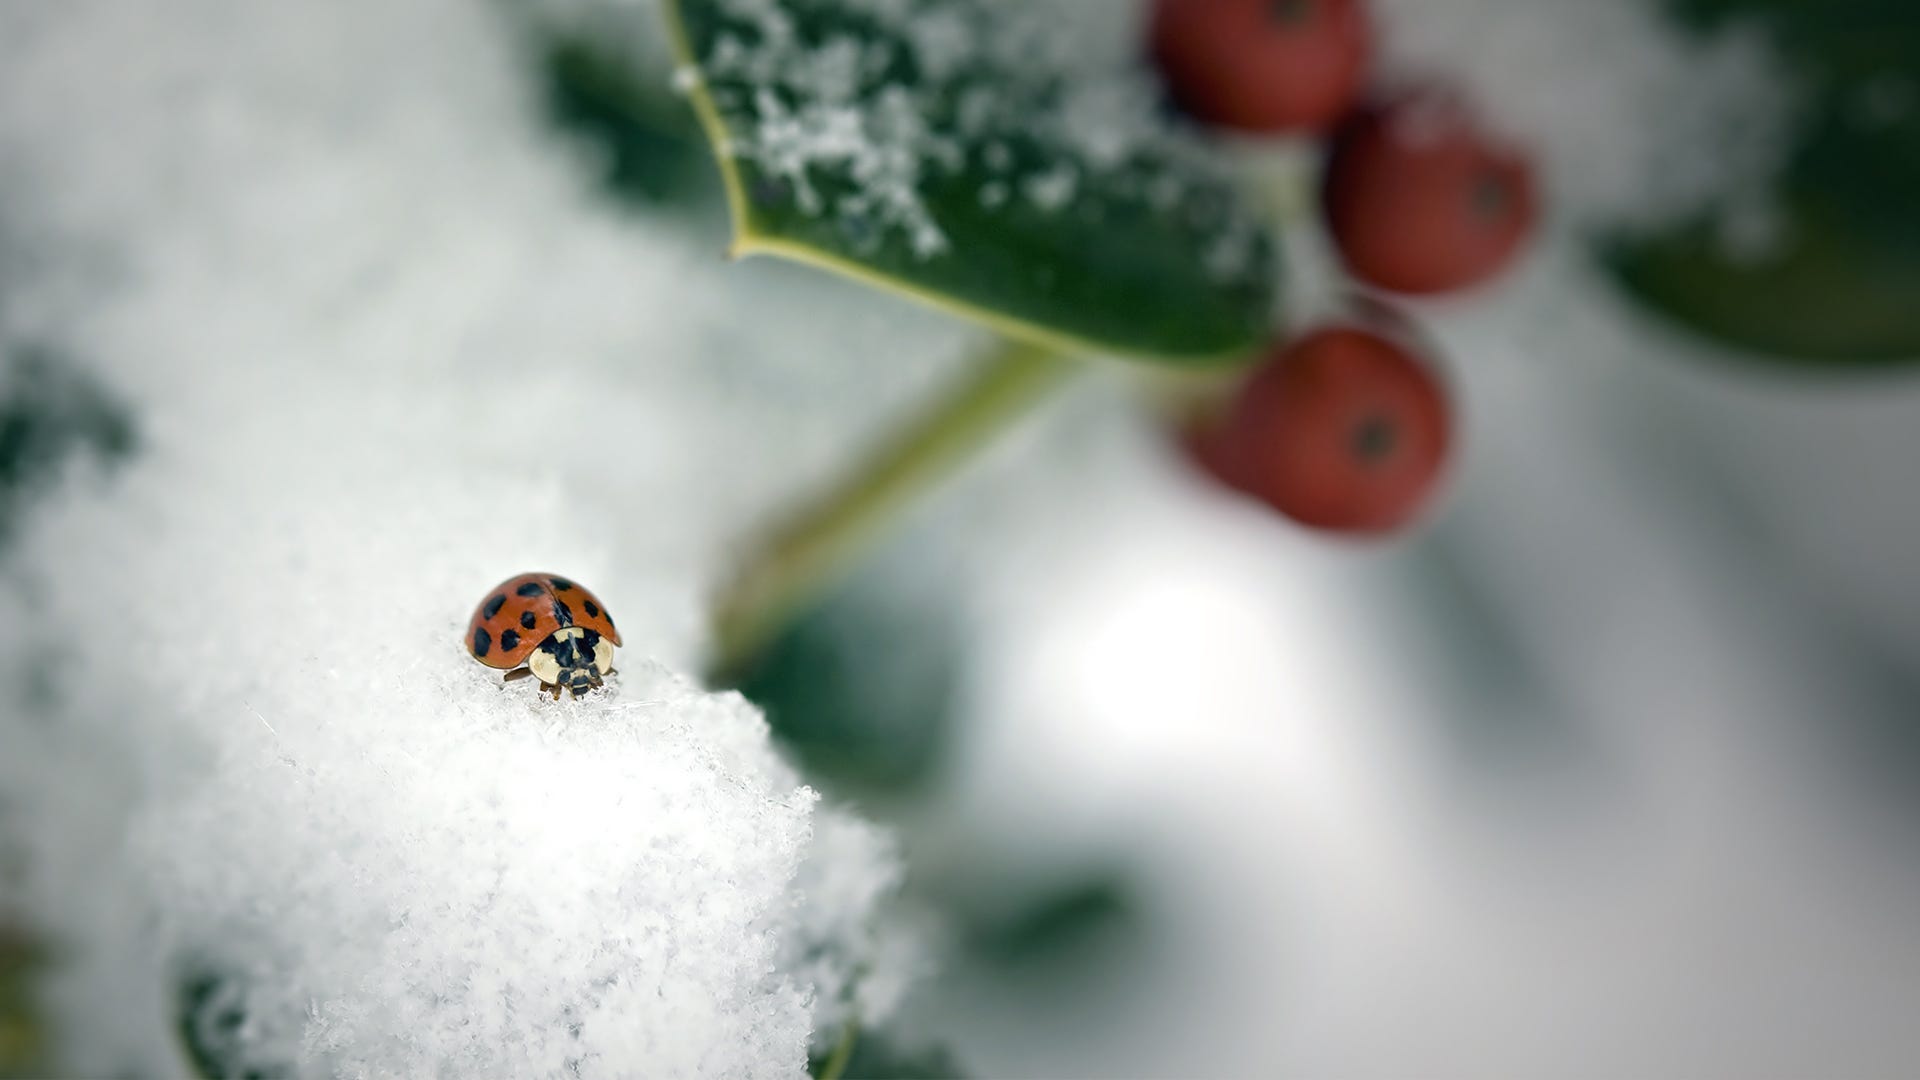 How Do Cold Temperatures Affect Insects?